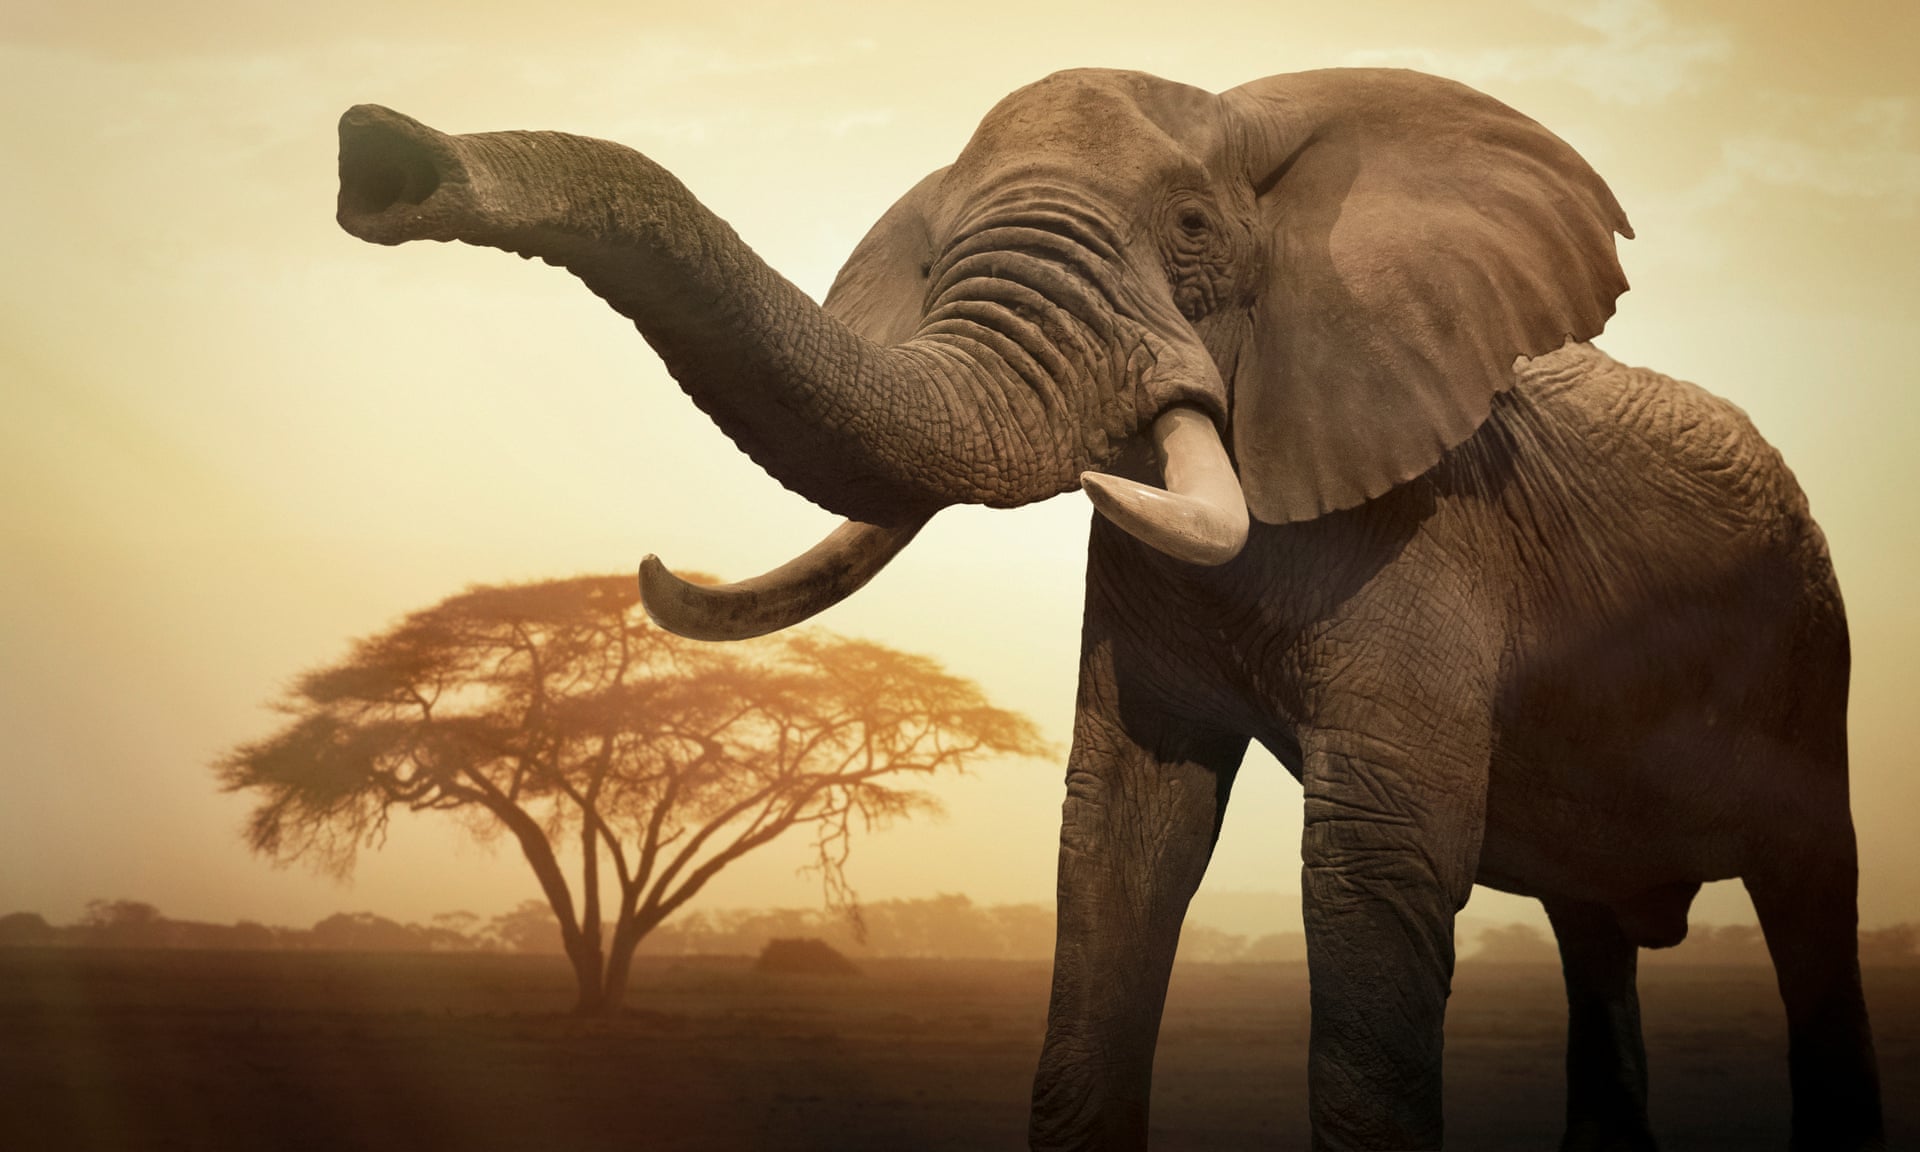 A giant female African elephant (Loxodonta africana) at sunset showing trunk as an aggressive signal. Photograph: Buena Vista Images/Getty Images